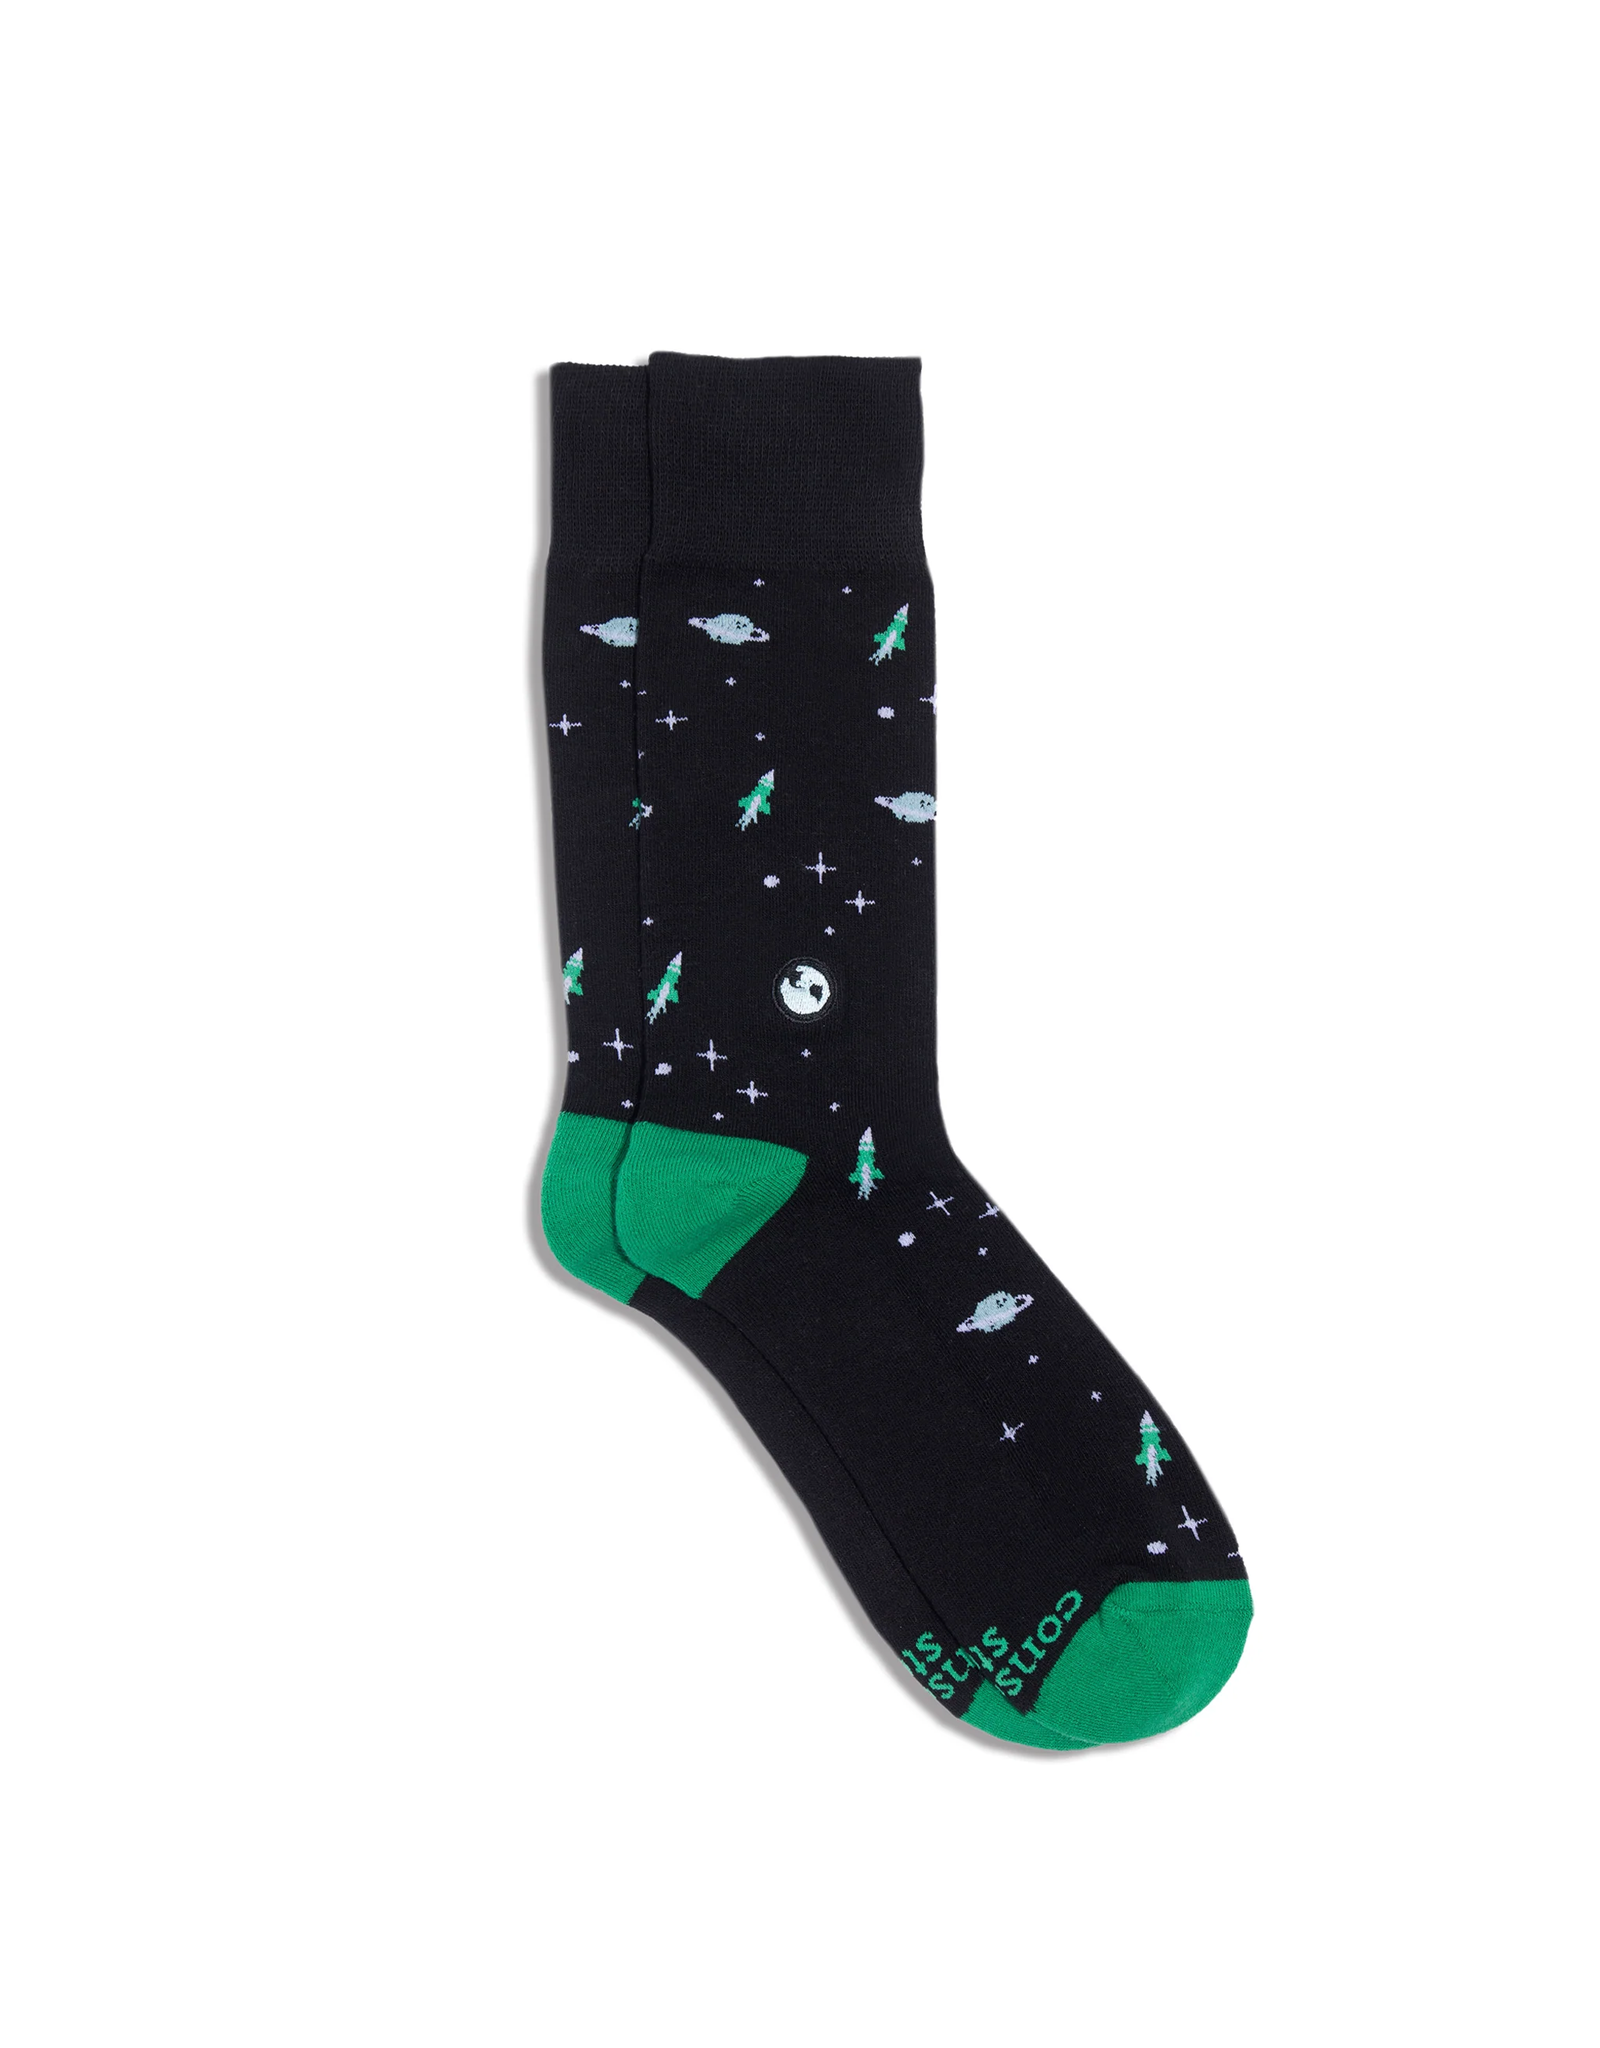 Trade roots Socks that Protect Our Planet, Space